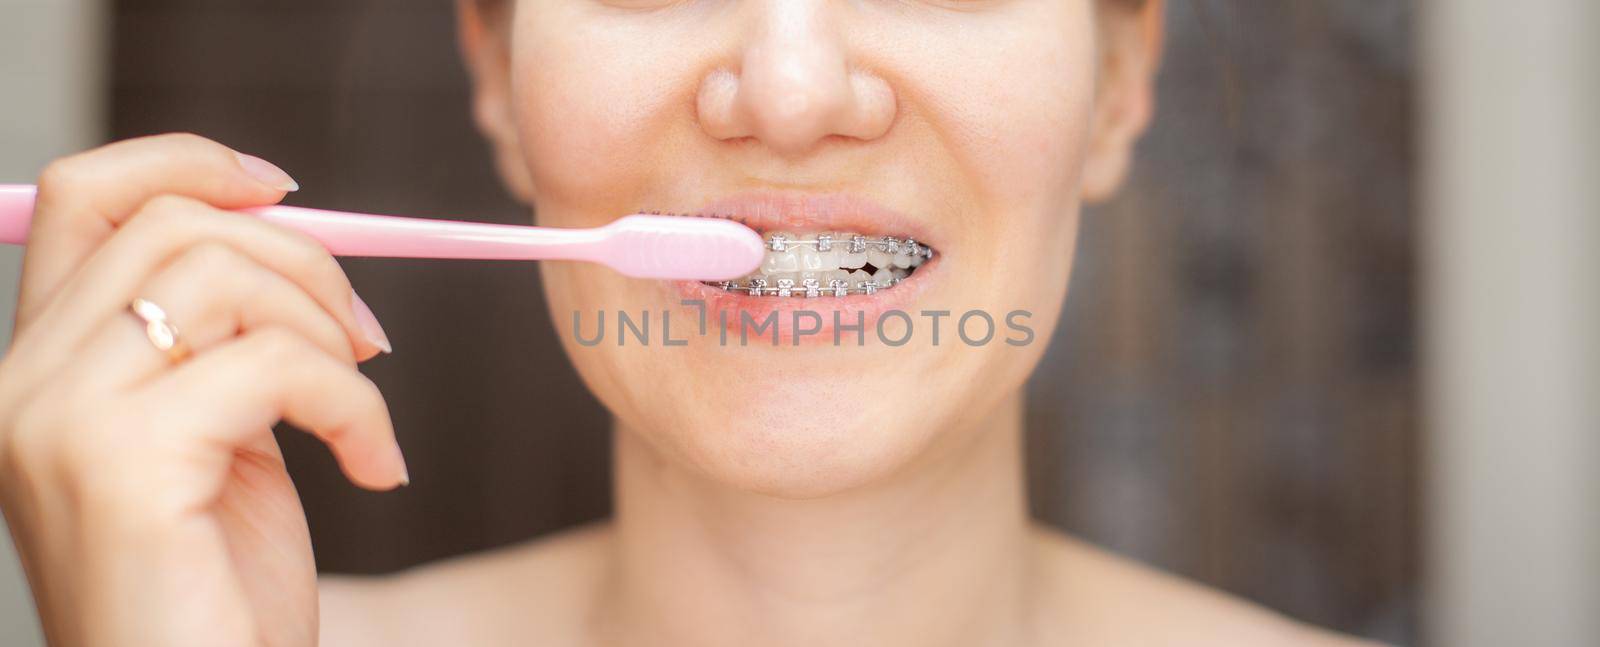 Girl with braces on her teeth brushing her teeth with a toothbrush by AnatoliiFoto